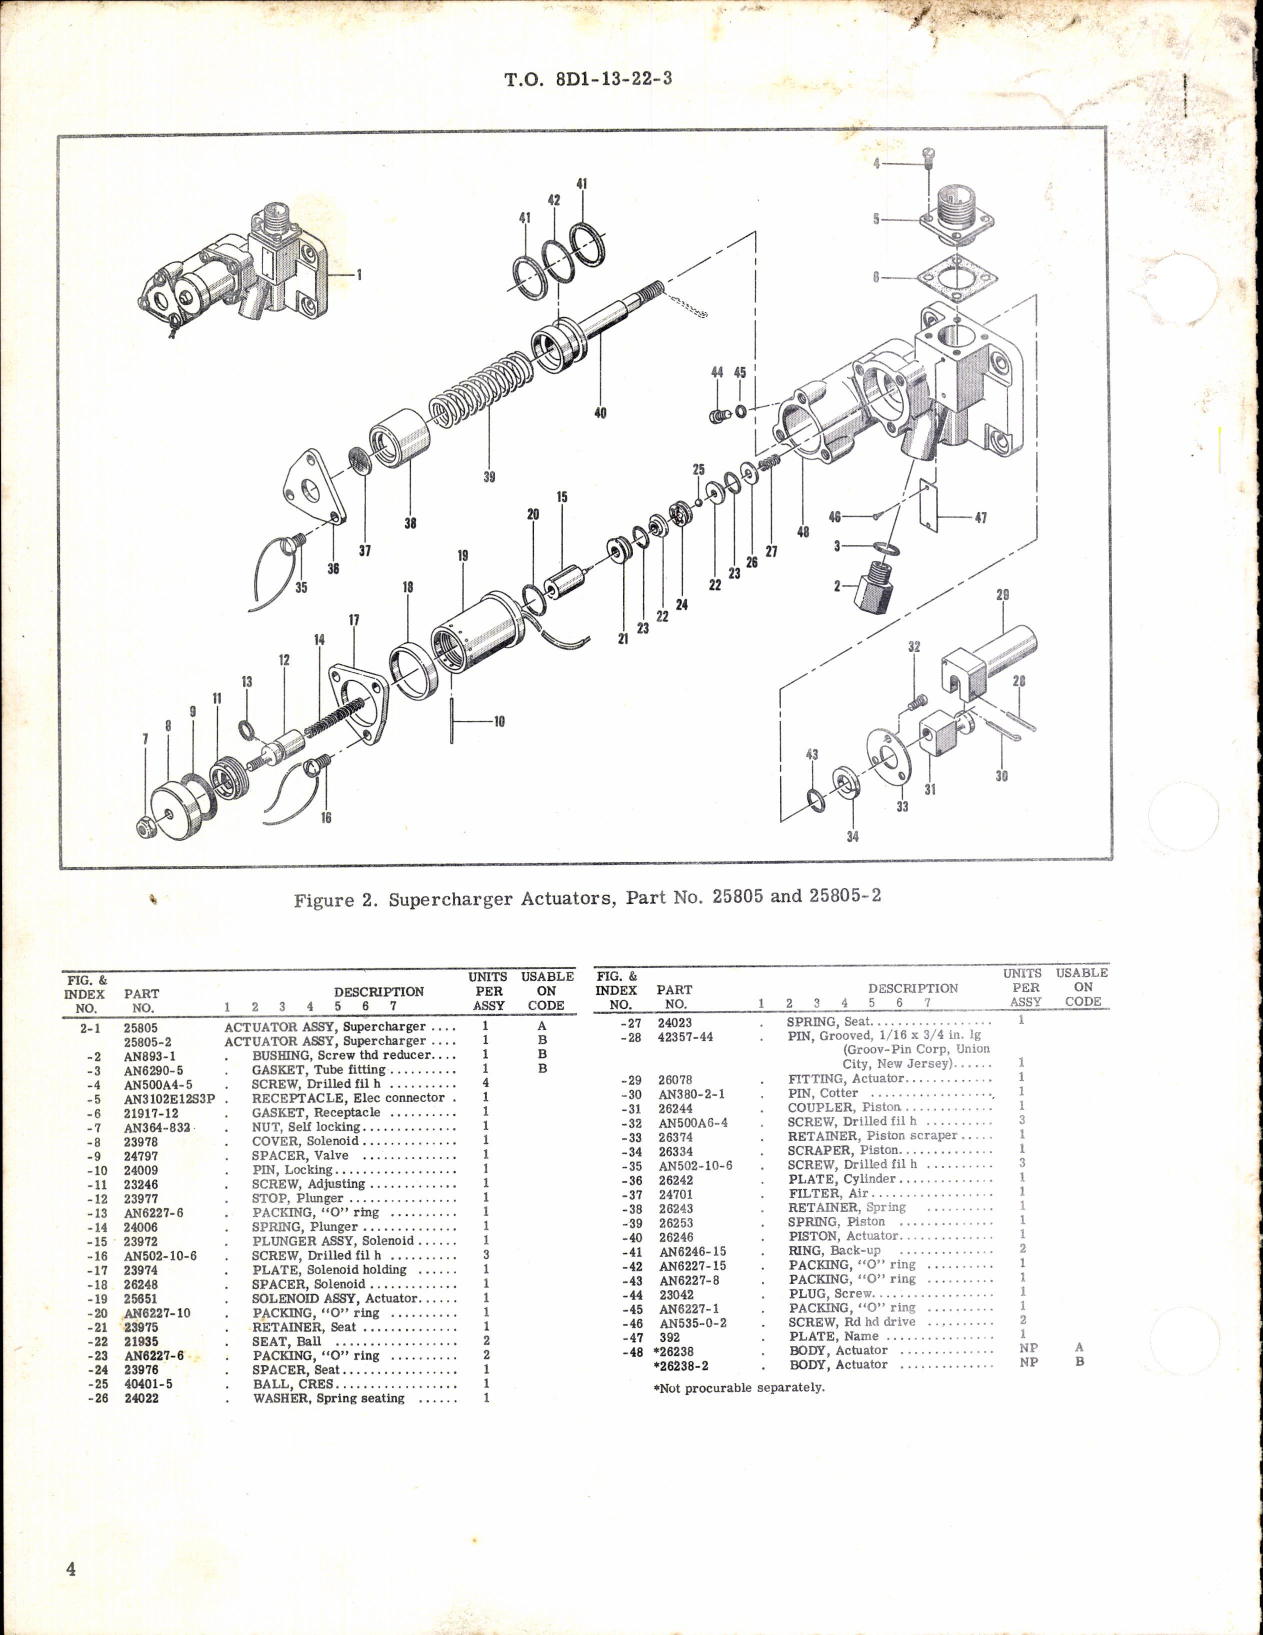 Sample page 4 from AirCorps Library document: Superchargher Actuators 25805 and 25805-2